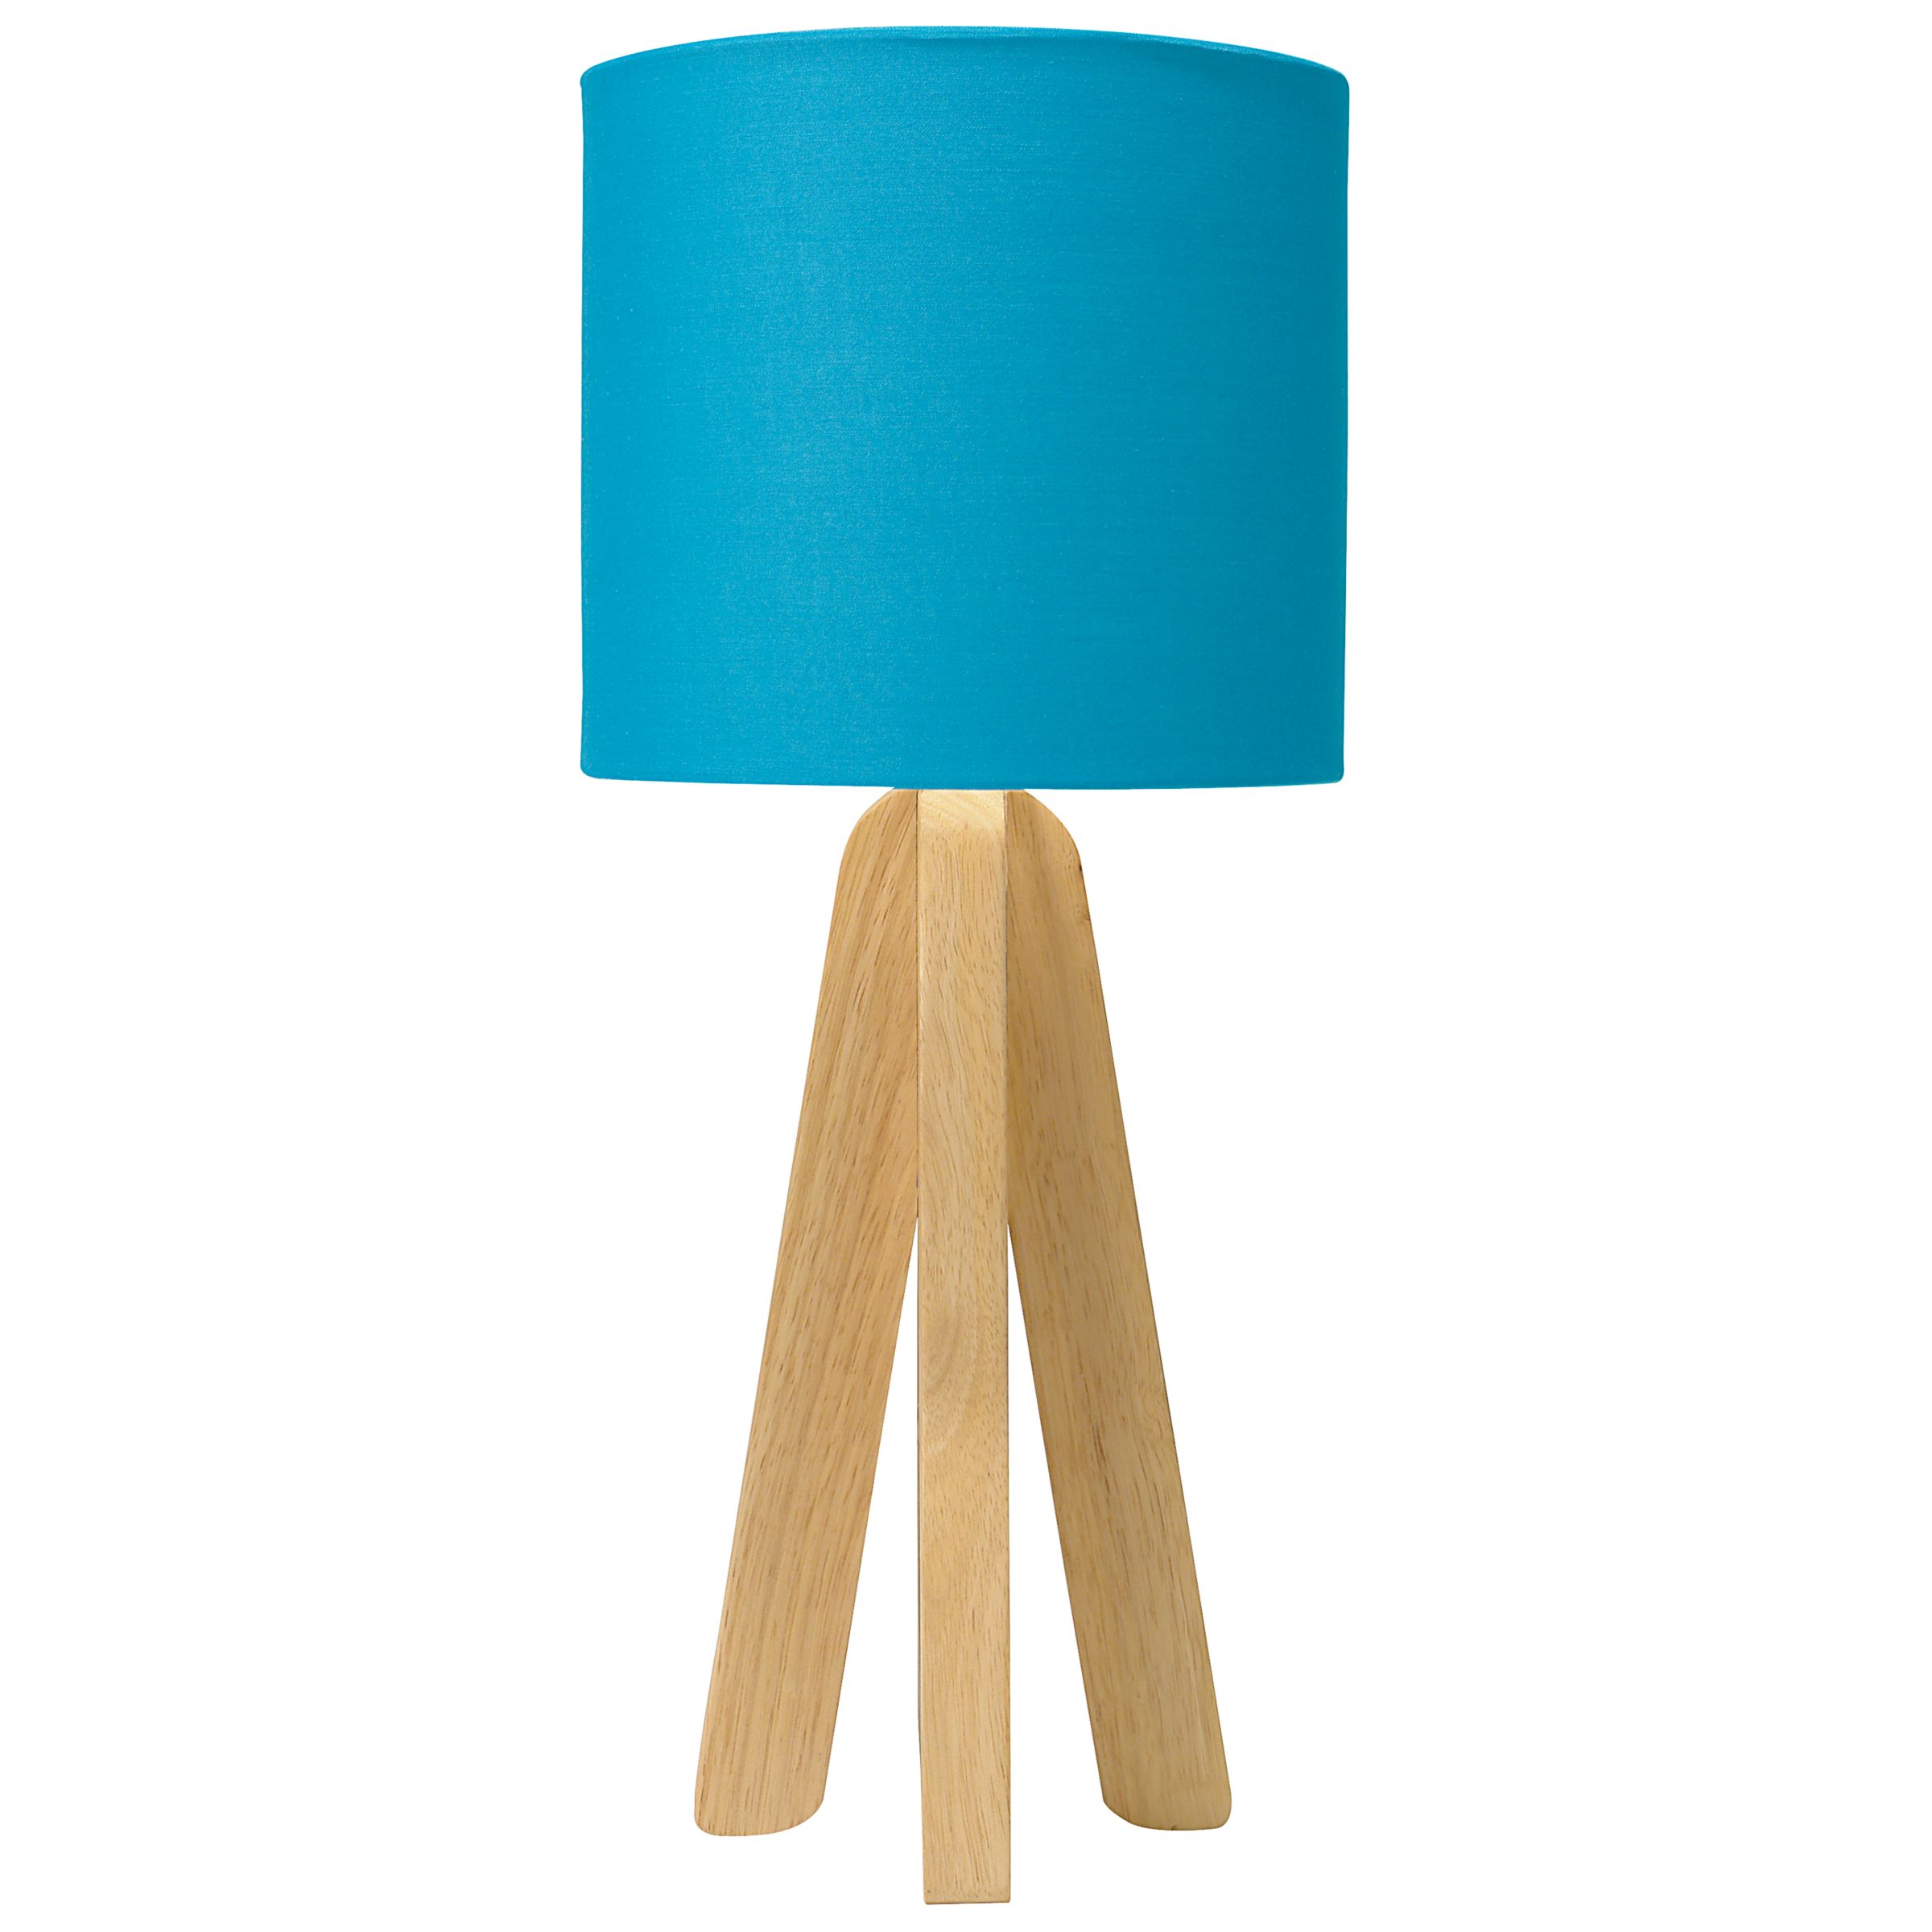 John Lewis Kylie Table Lamp, Turquoise